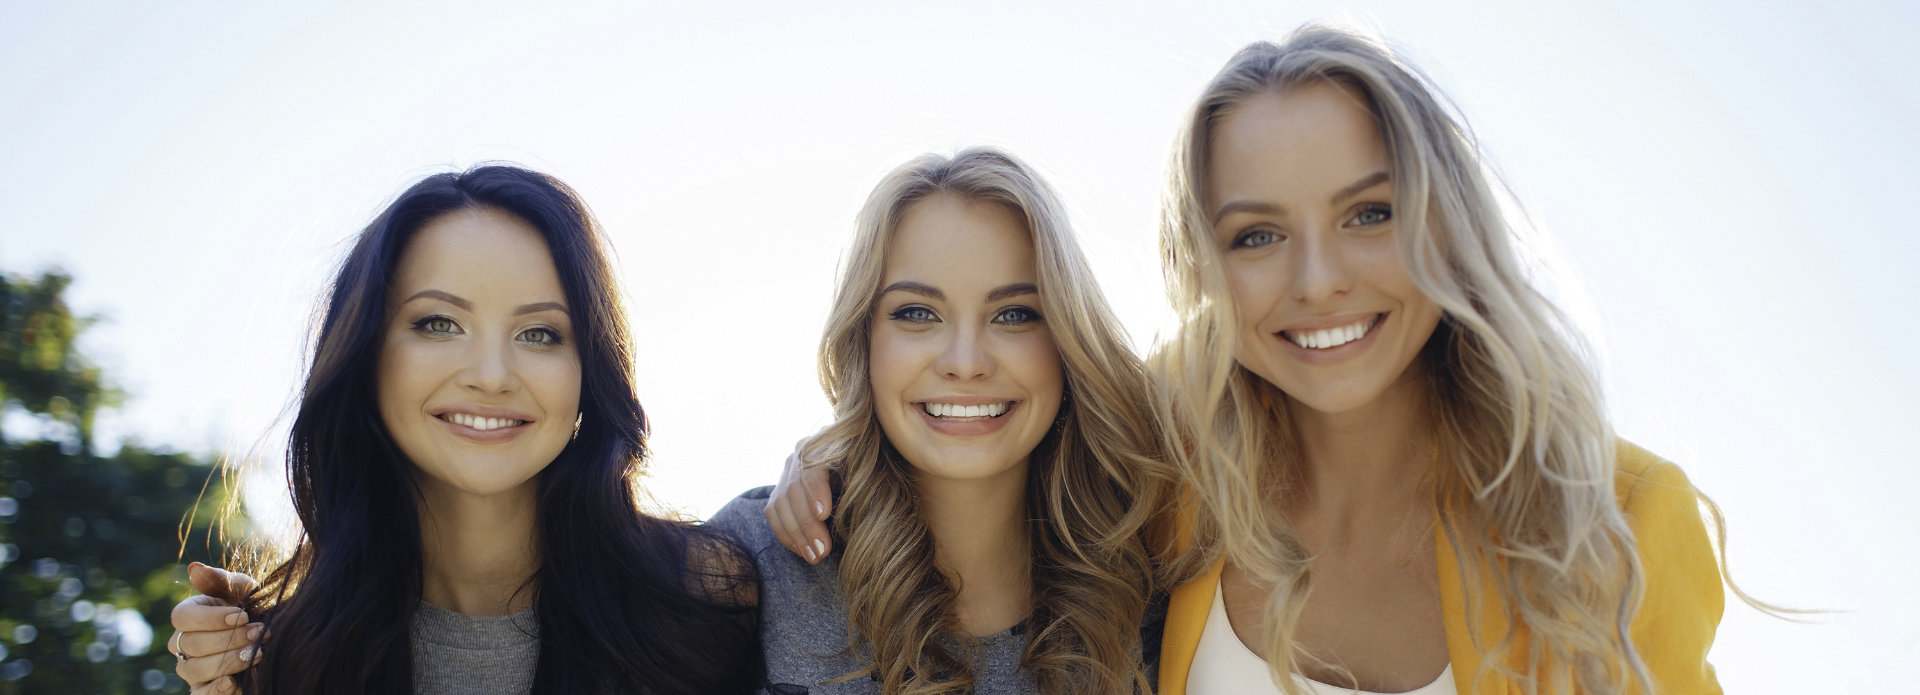 Three young women with perfect smiles.